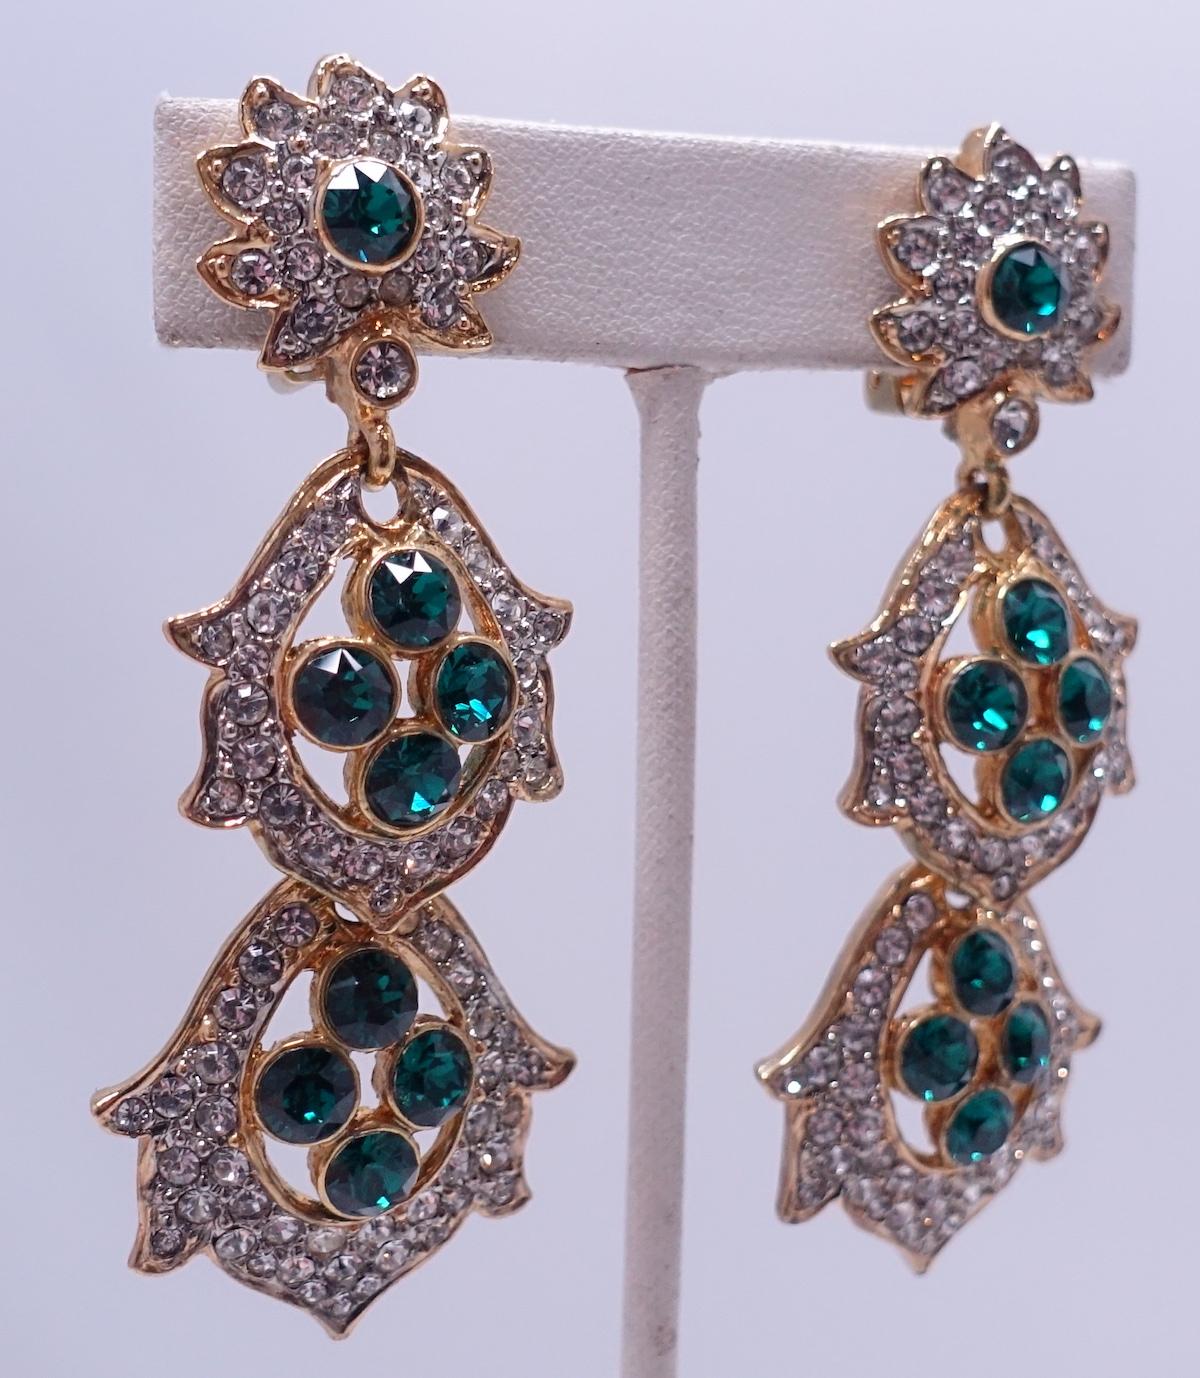 These signed Kenneth Lane drop earrings feature green and clear crystals in a gold tone setting.  In excellent condition, these clip earrings measure 3” long x 1” at bottom and are signed “Kenneth Lane”